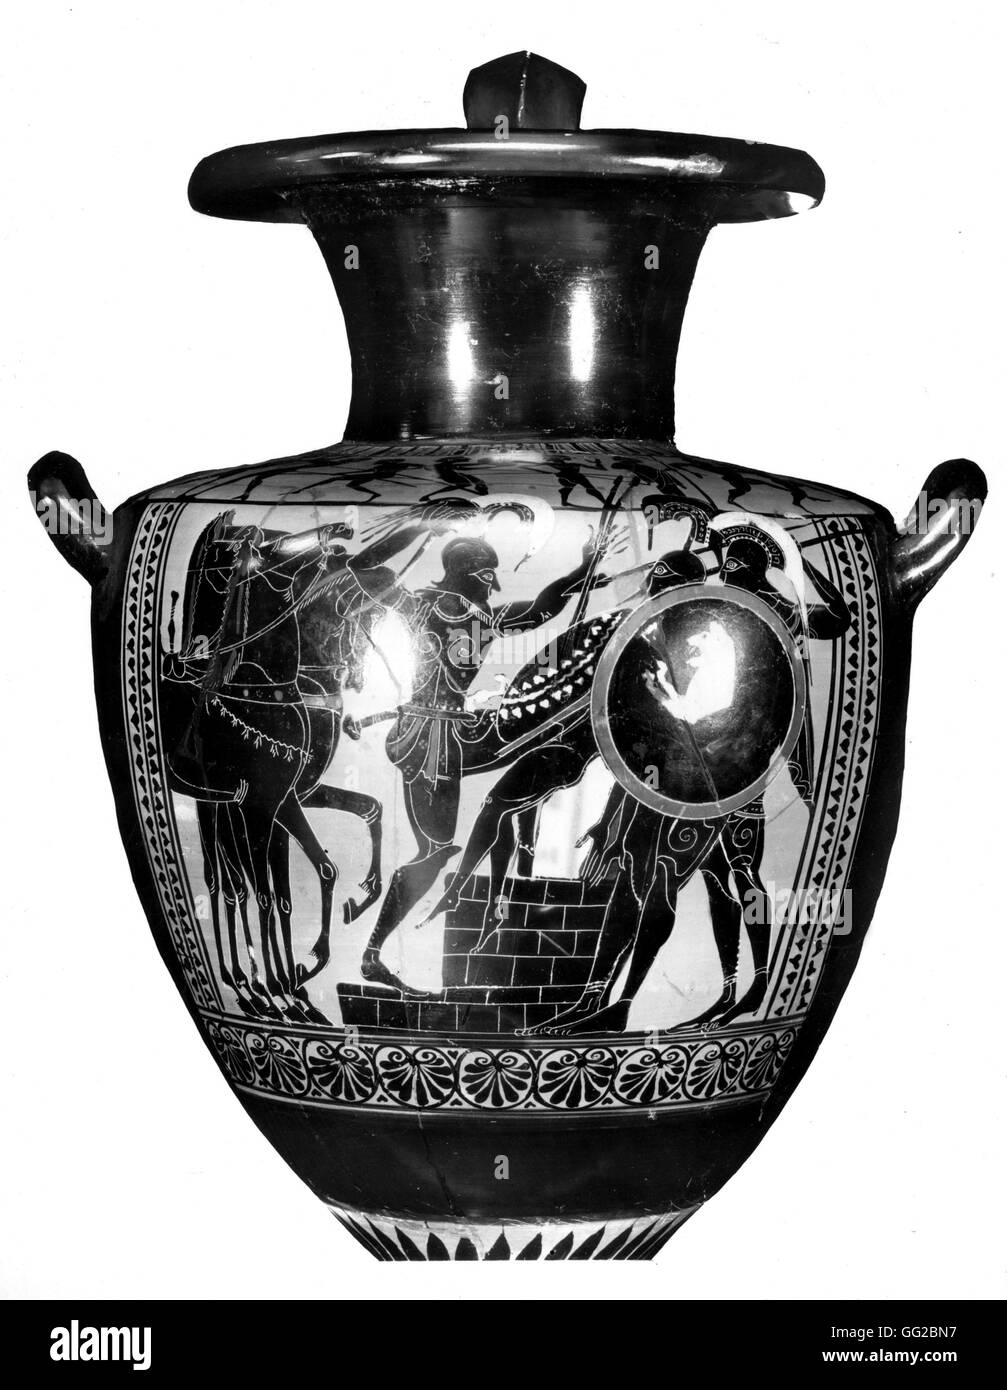 Vase depicting soldiers Antiquity ancient Greece Stock Photo